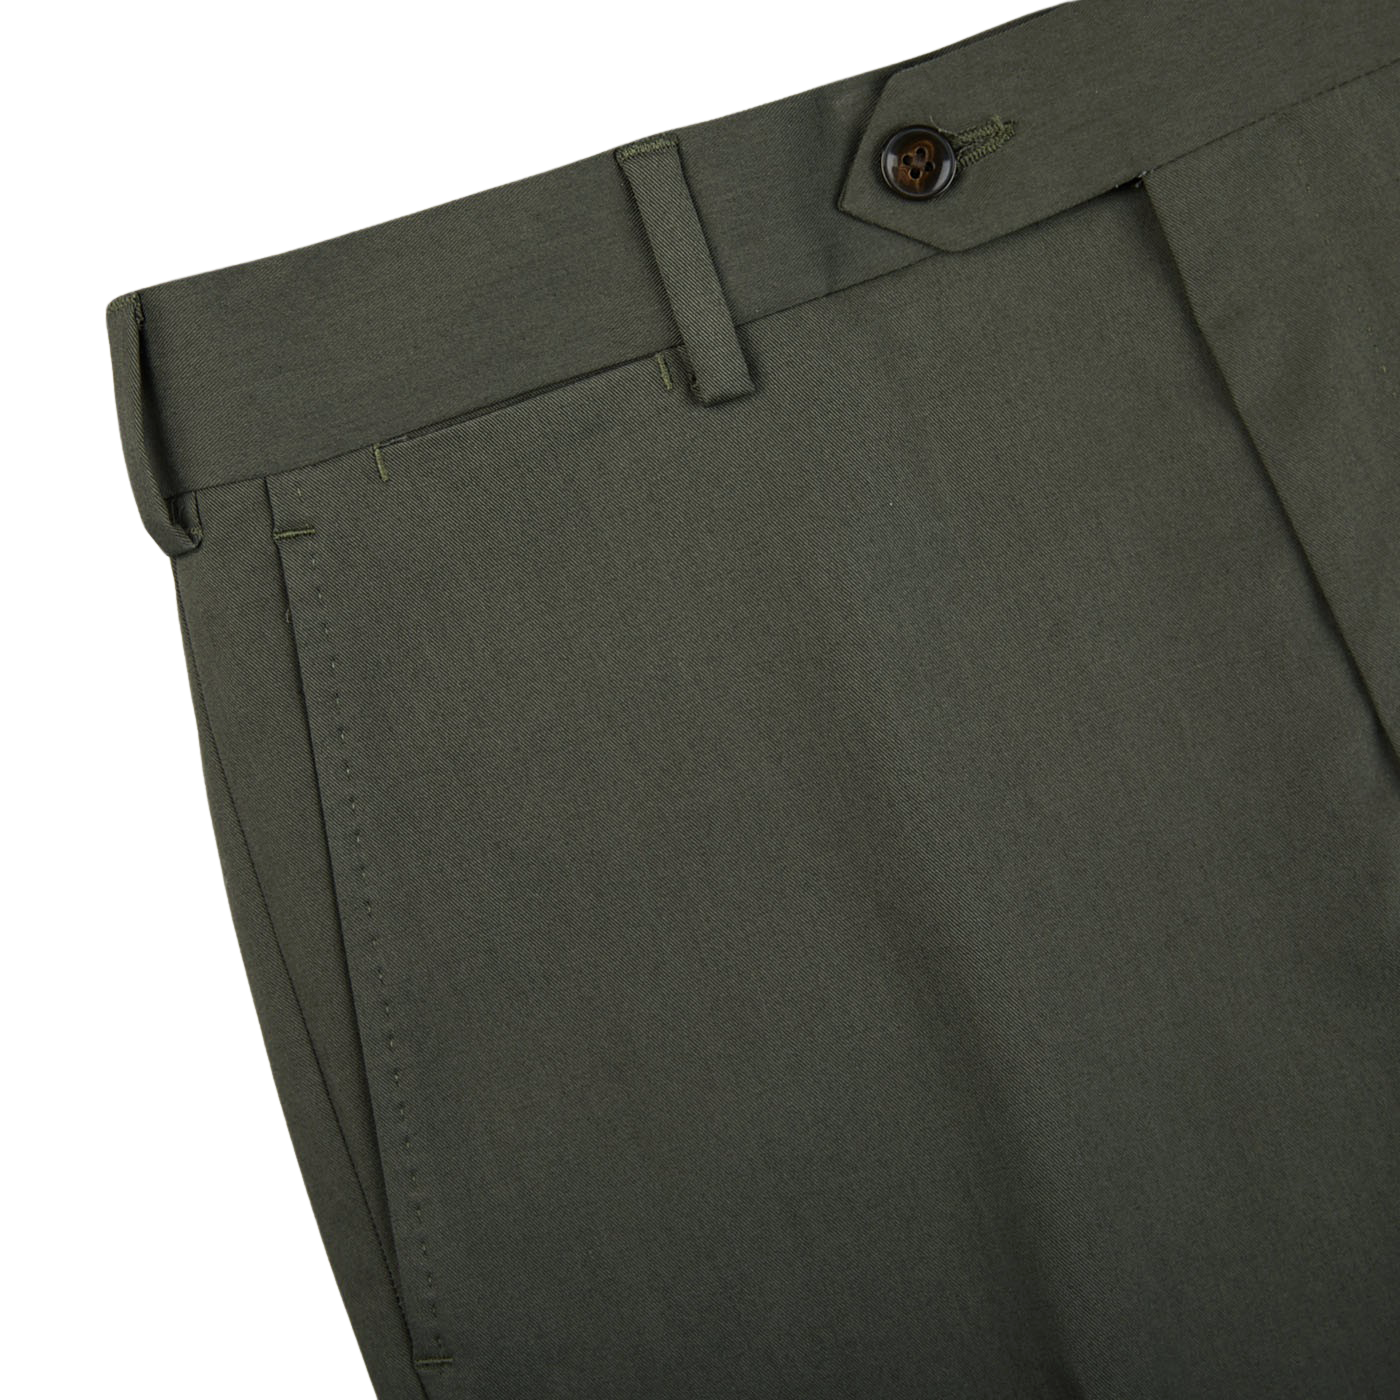 A close up view of Luigi Bianchi Dark Green Cotton Twill Flat Front Trousers.